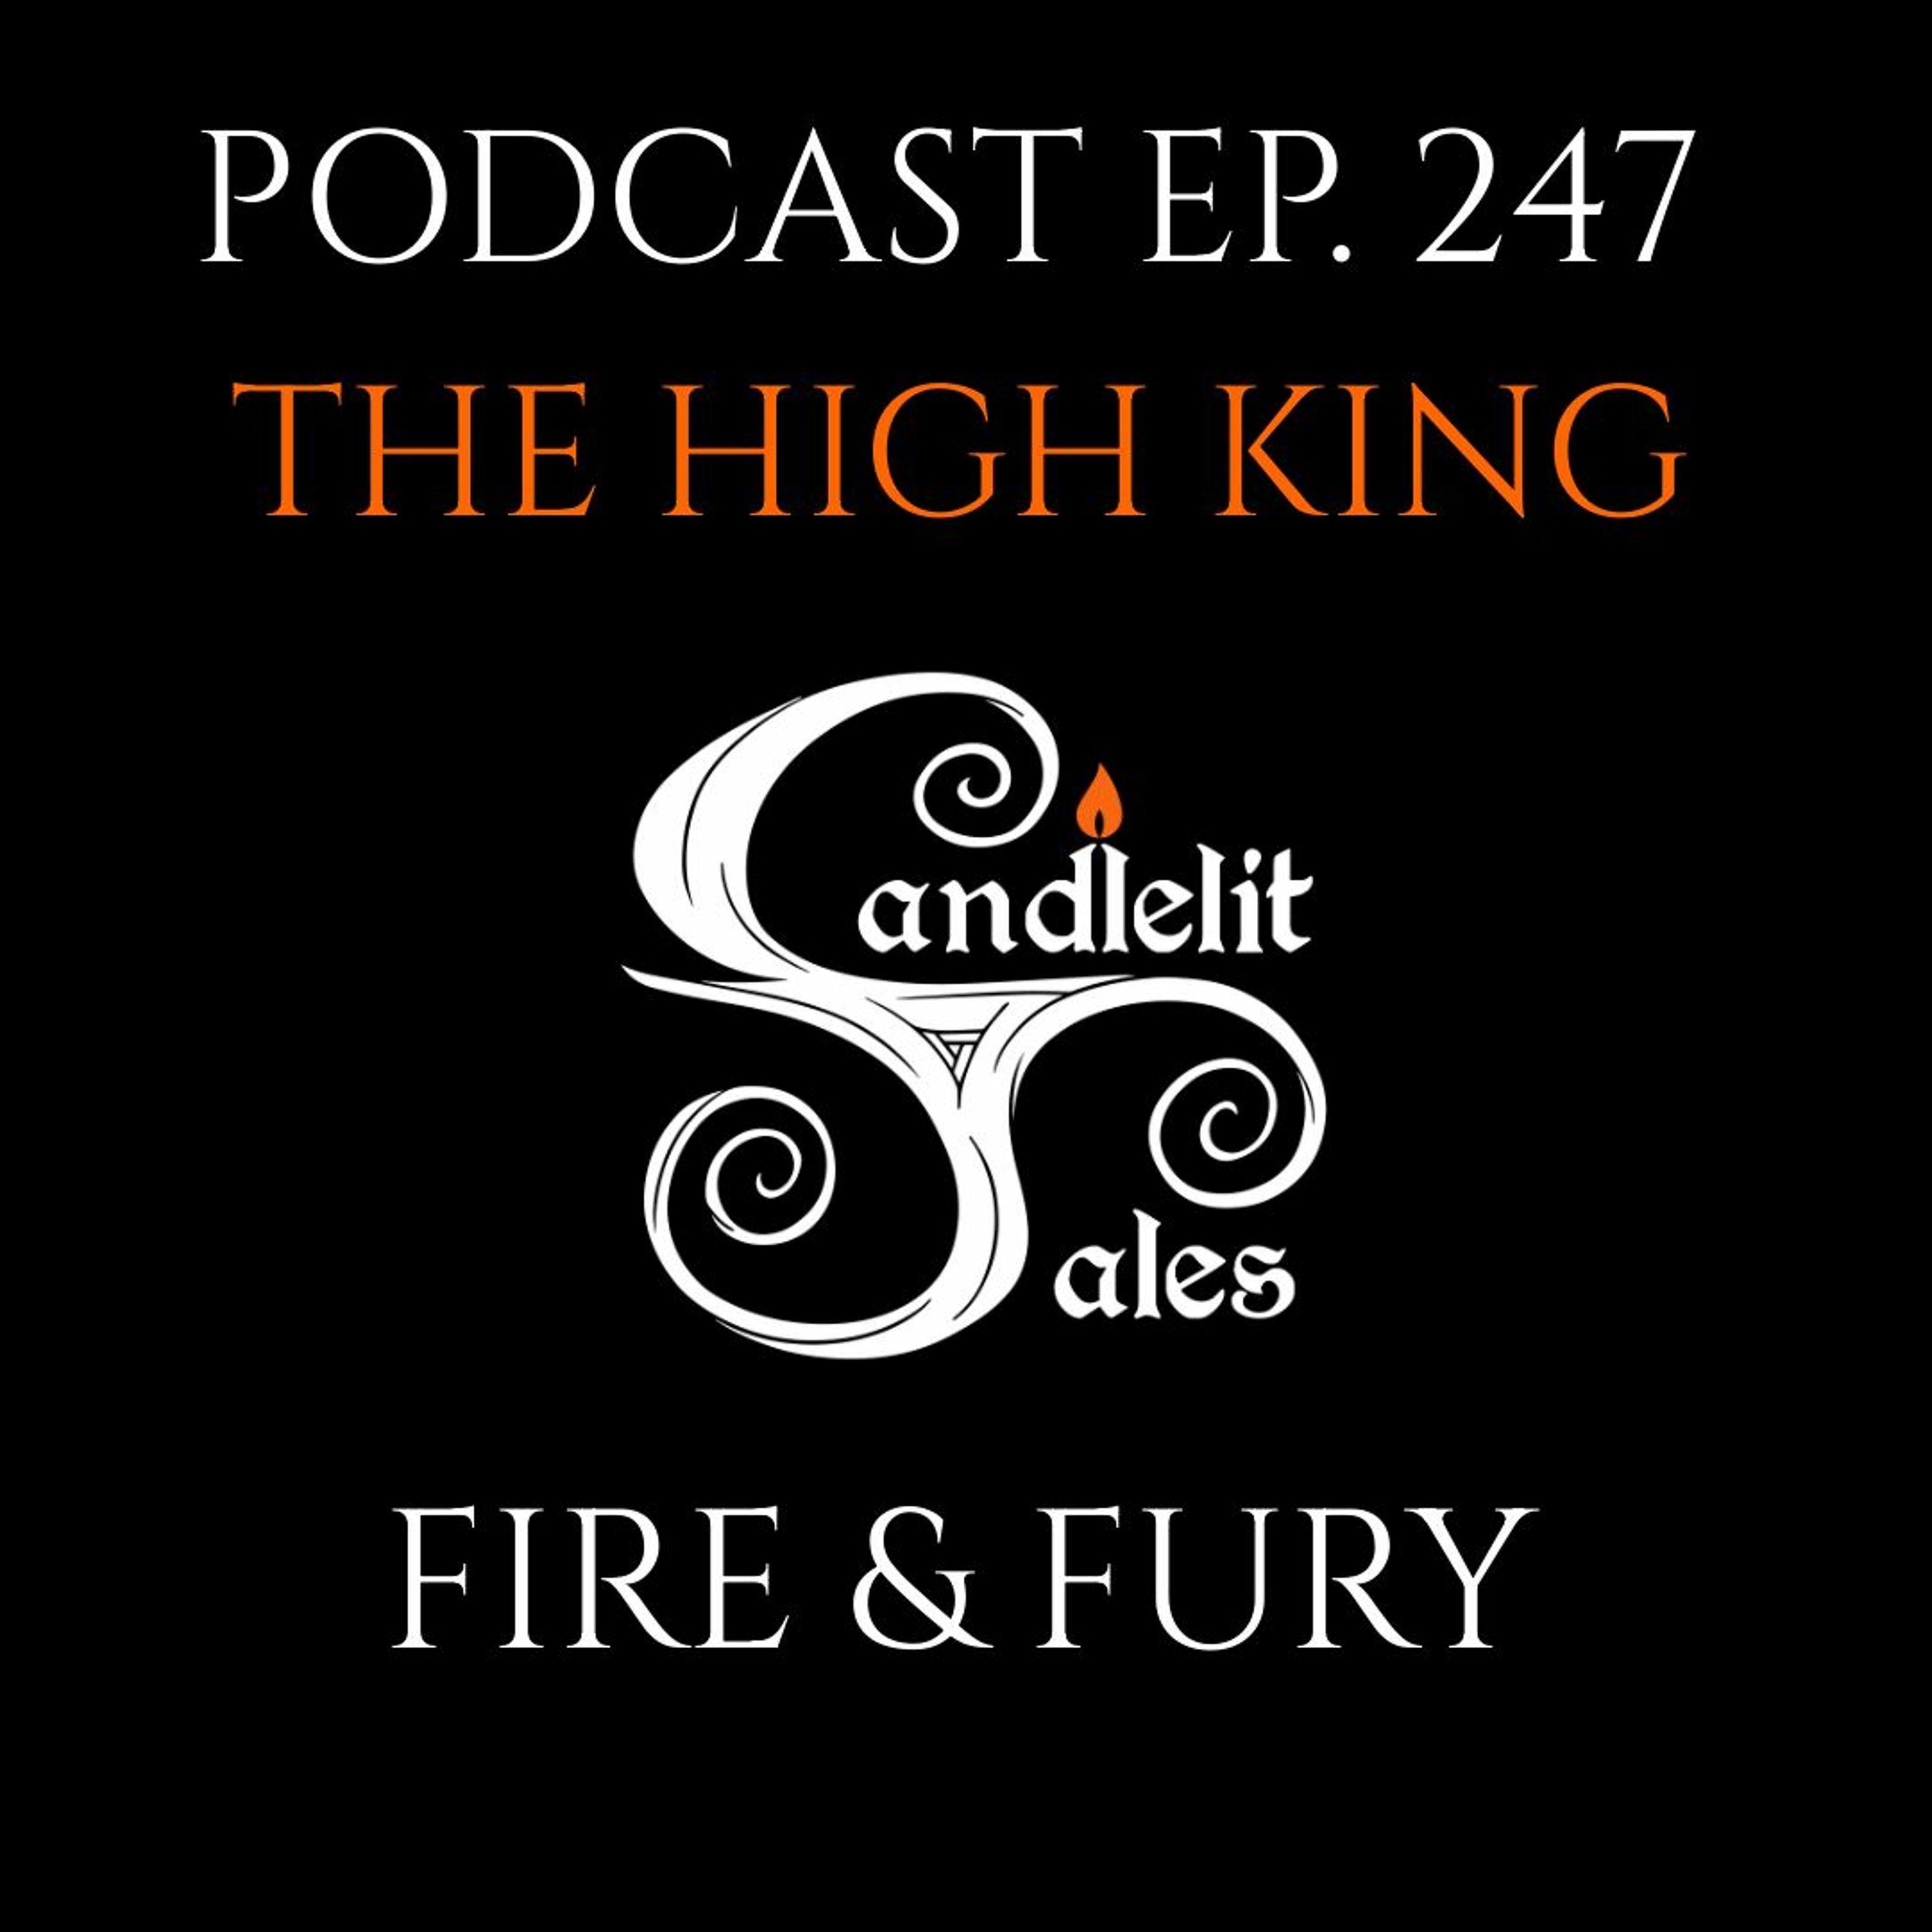 Episode 247 - The High King - Fire & Fury